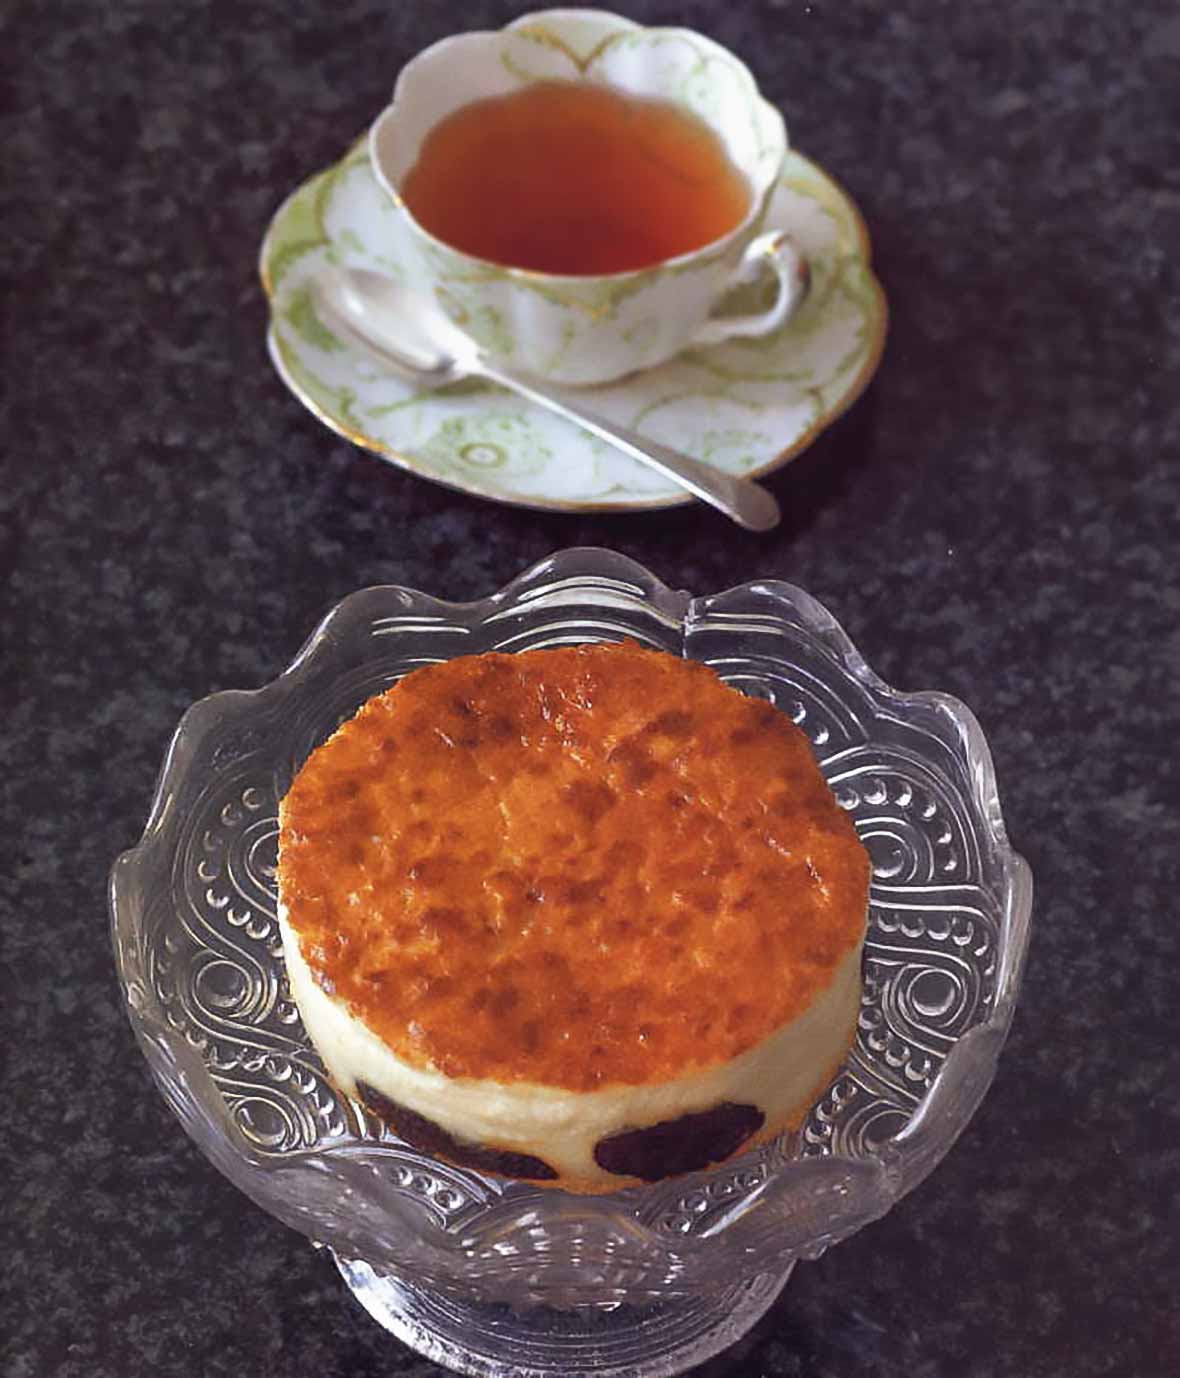 Far Breton French Custard Cake on cake stand with a cup of tea.